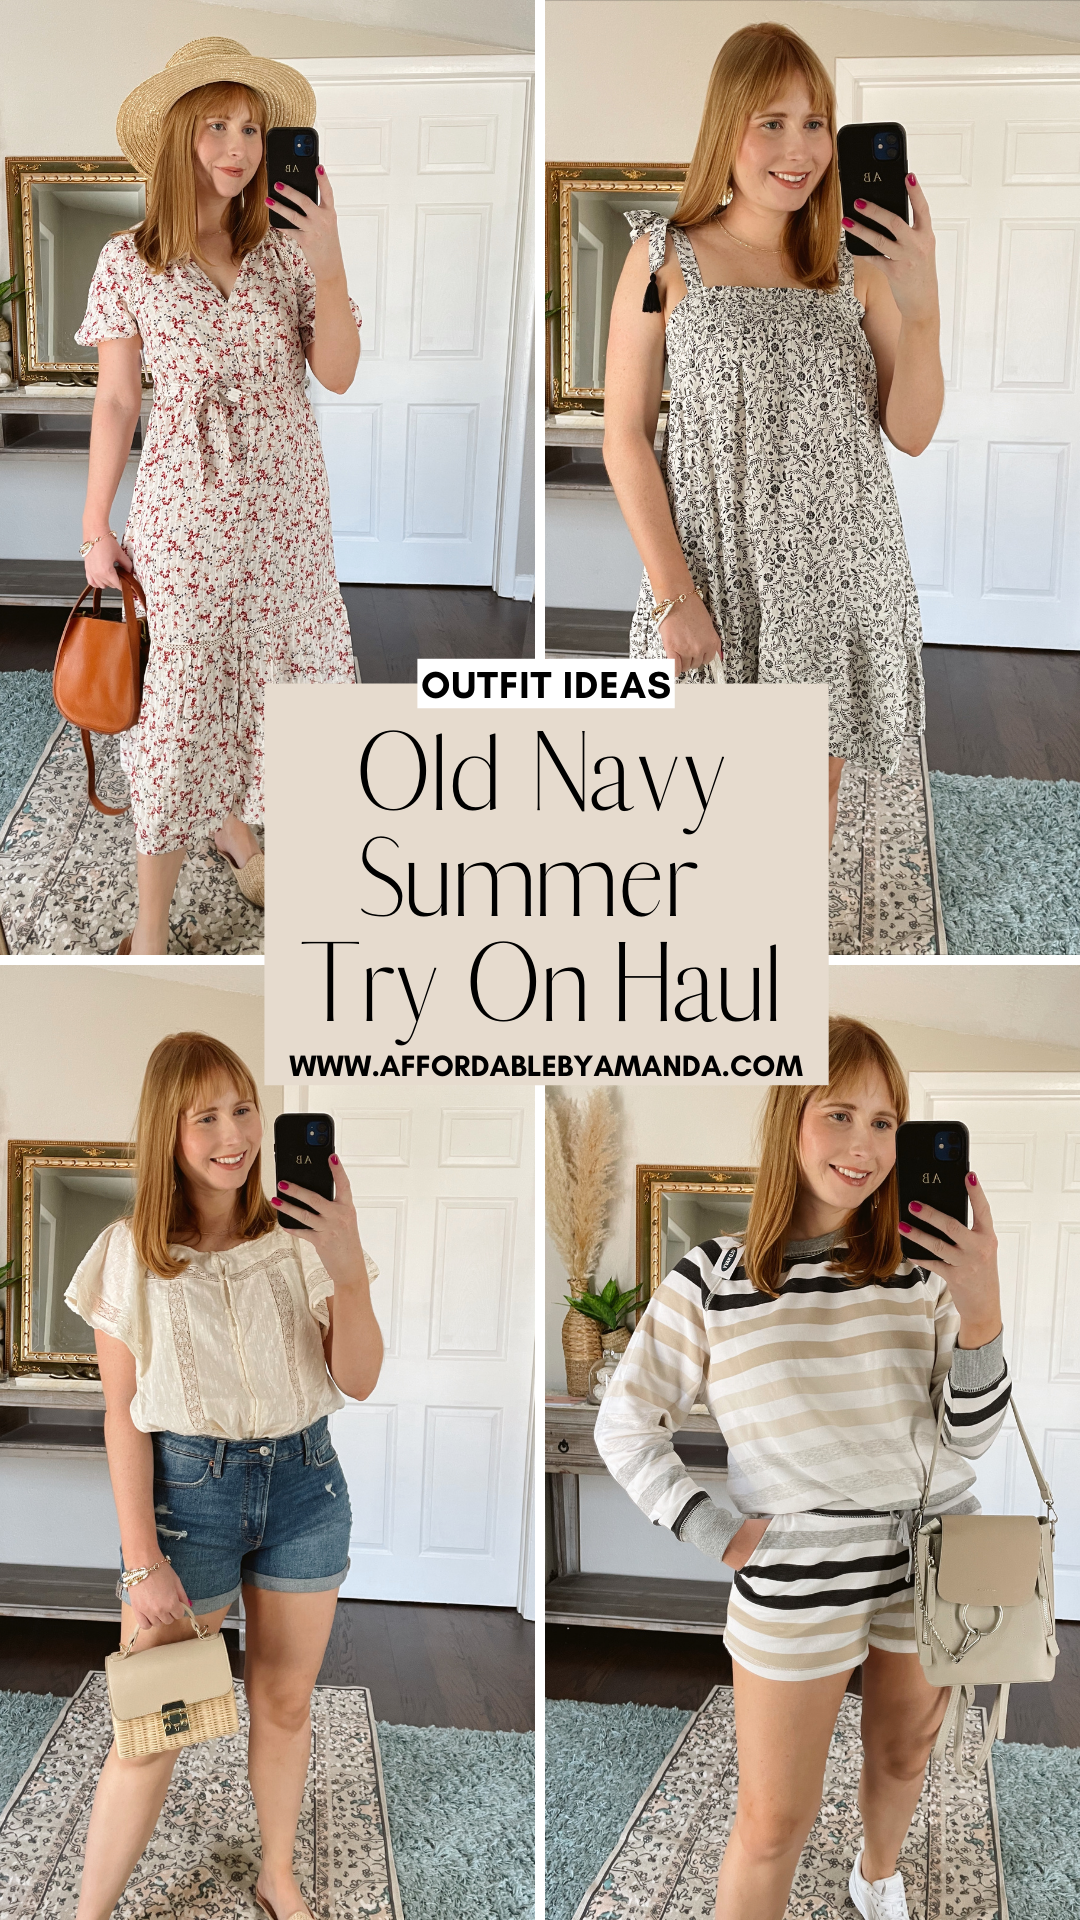 5 Affordable Outfits from Old Navy for Summer | Affordable by Amanda